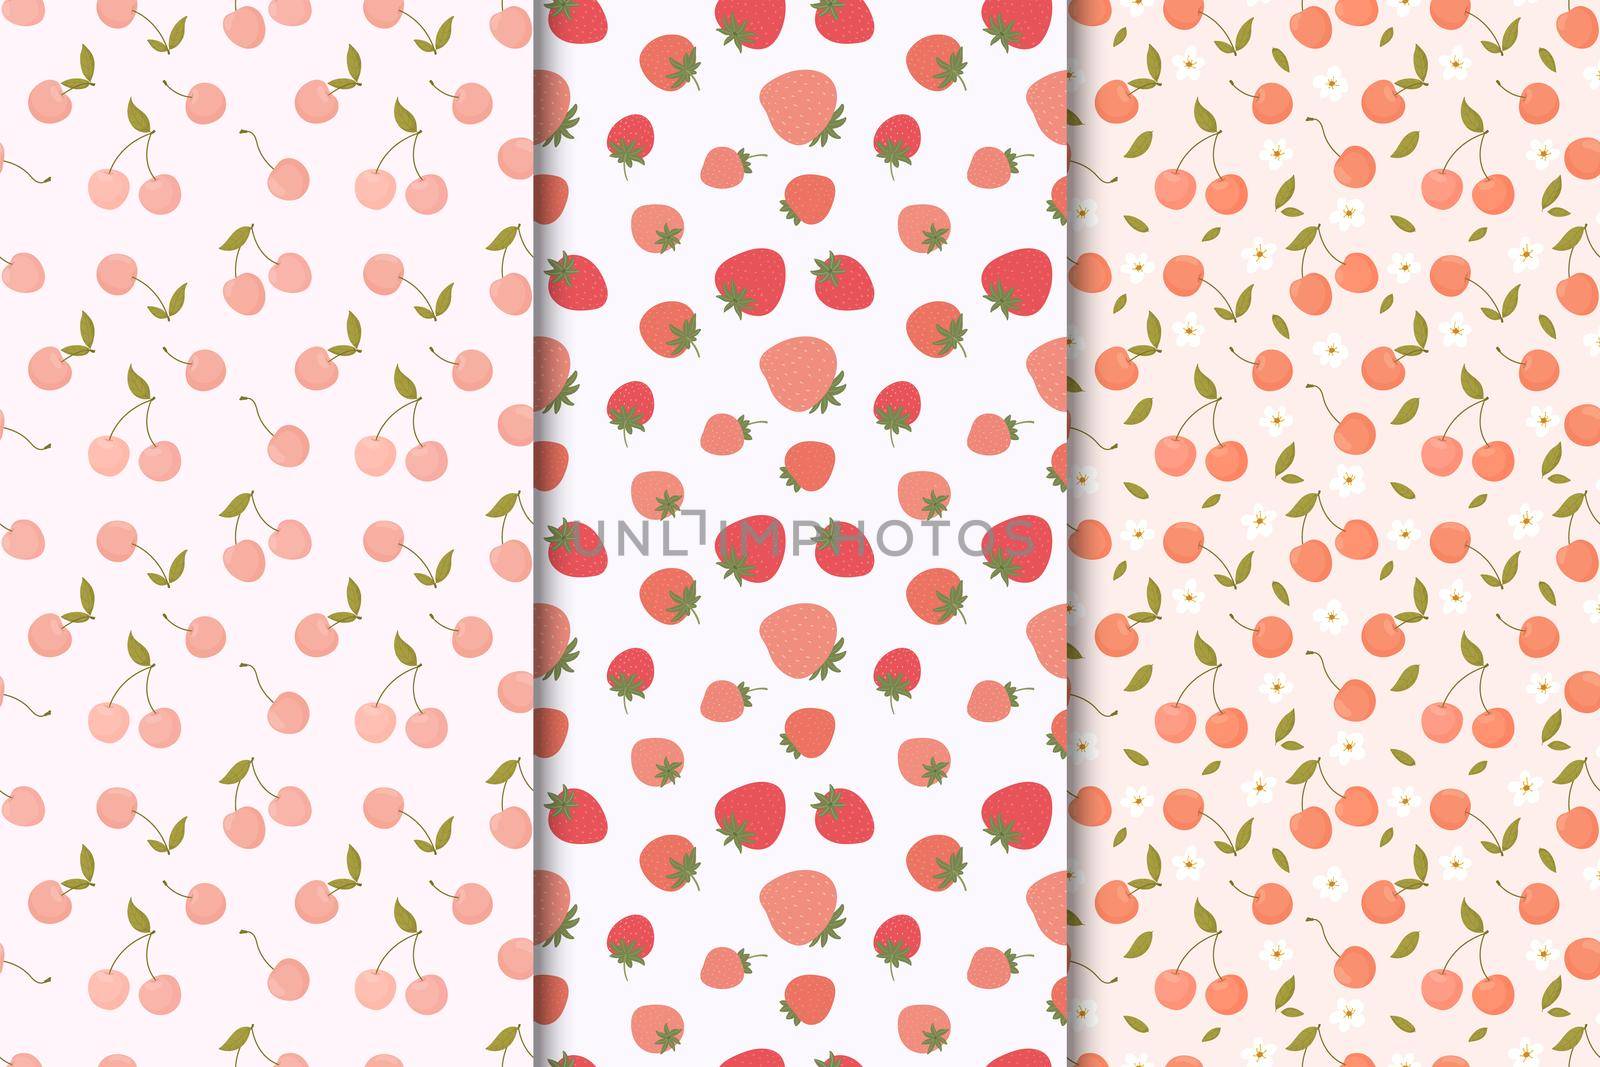 Set of seamless patterns with summer fruits. cherries, strawberries, flowers and leaves on a white and light pink background. great for fabric, wrapping paper, etc. Vector illustration.